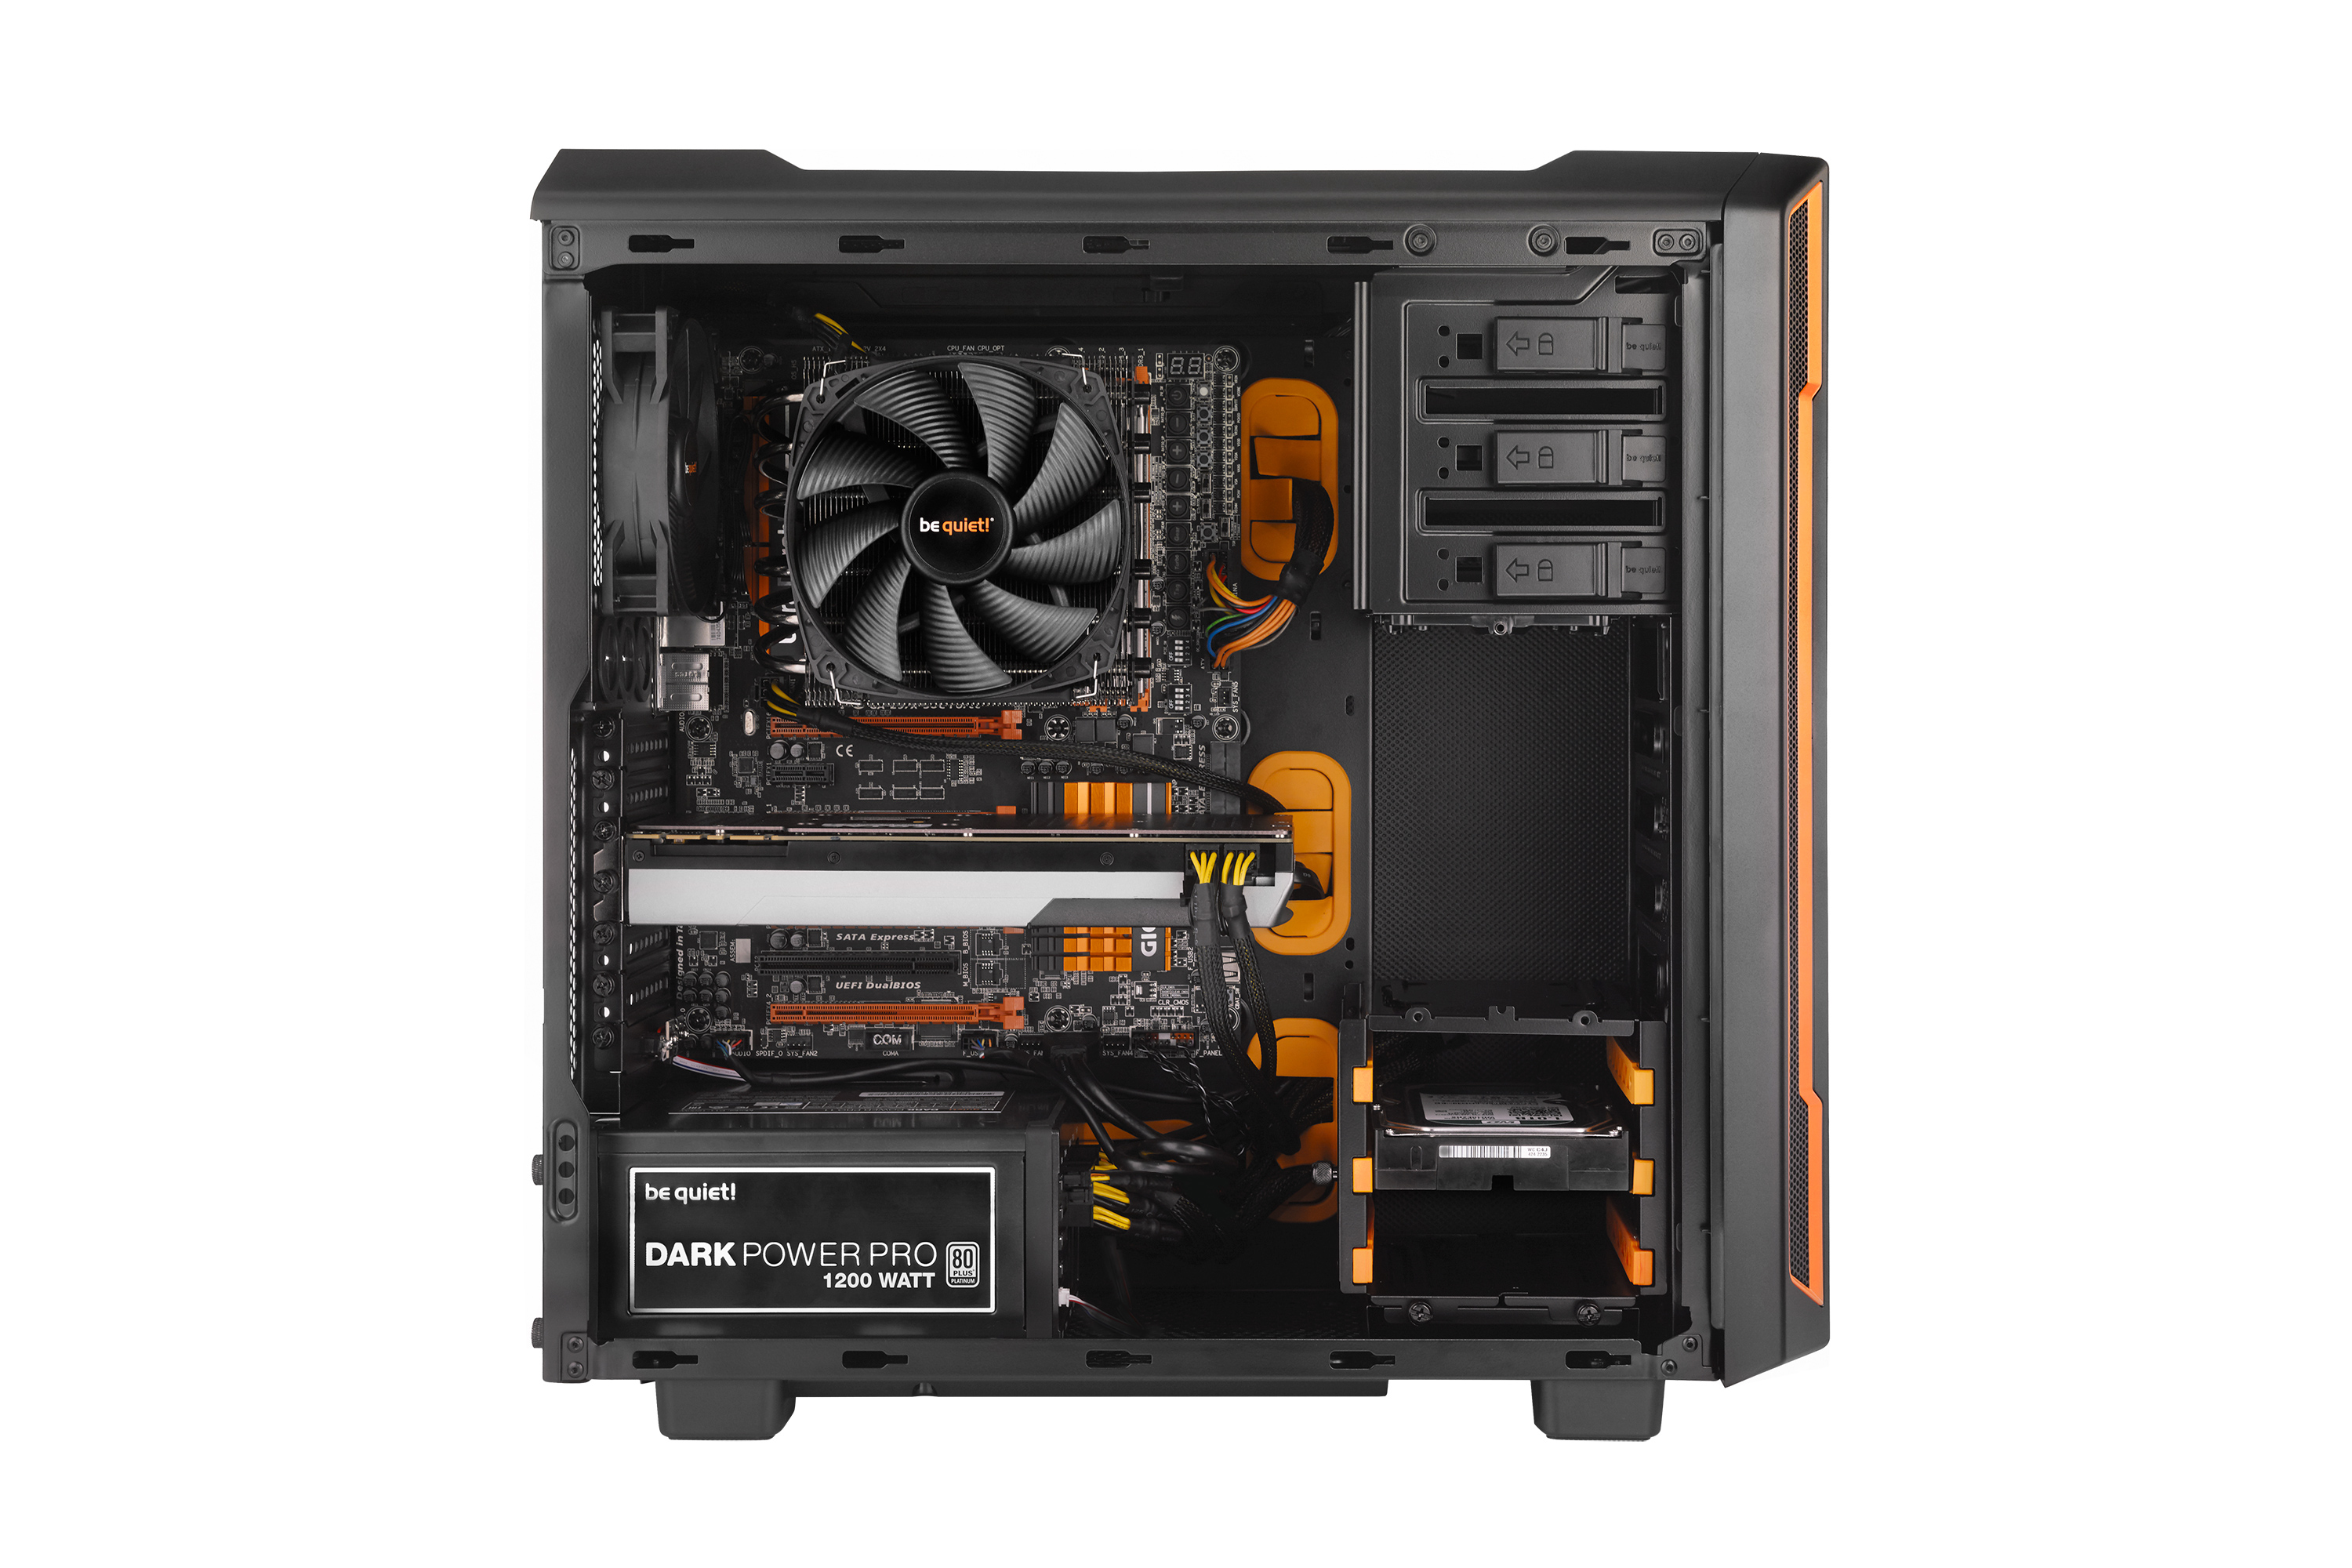 be quiet! Silent Base 600 Window Orange, 495 x 230 x 493, IO-panel 2x USB 3.0, 2x USB 2.0, HD Audio, 3x 5,25, 3x 3,5, 3x 2,5, inc 1x 140 mm en 1x 120 mm fan, dual air channel cooling